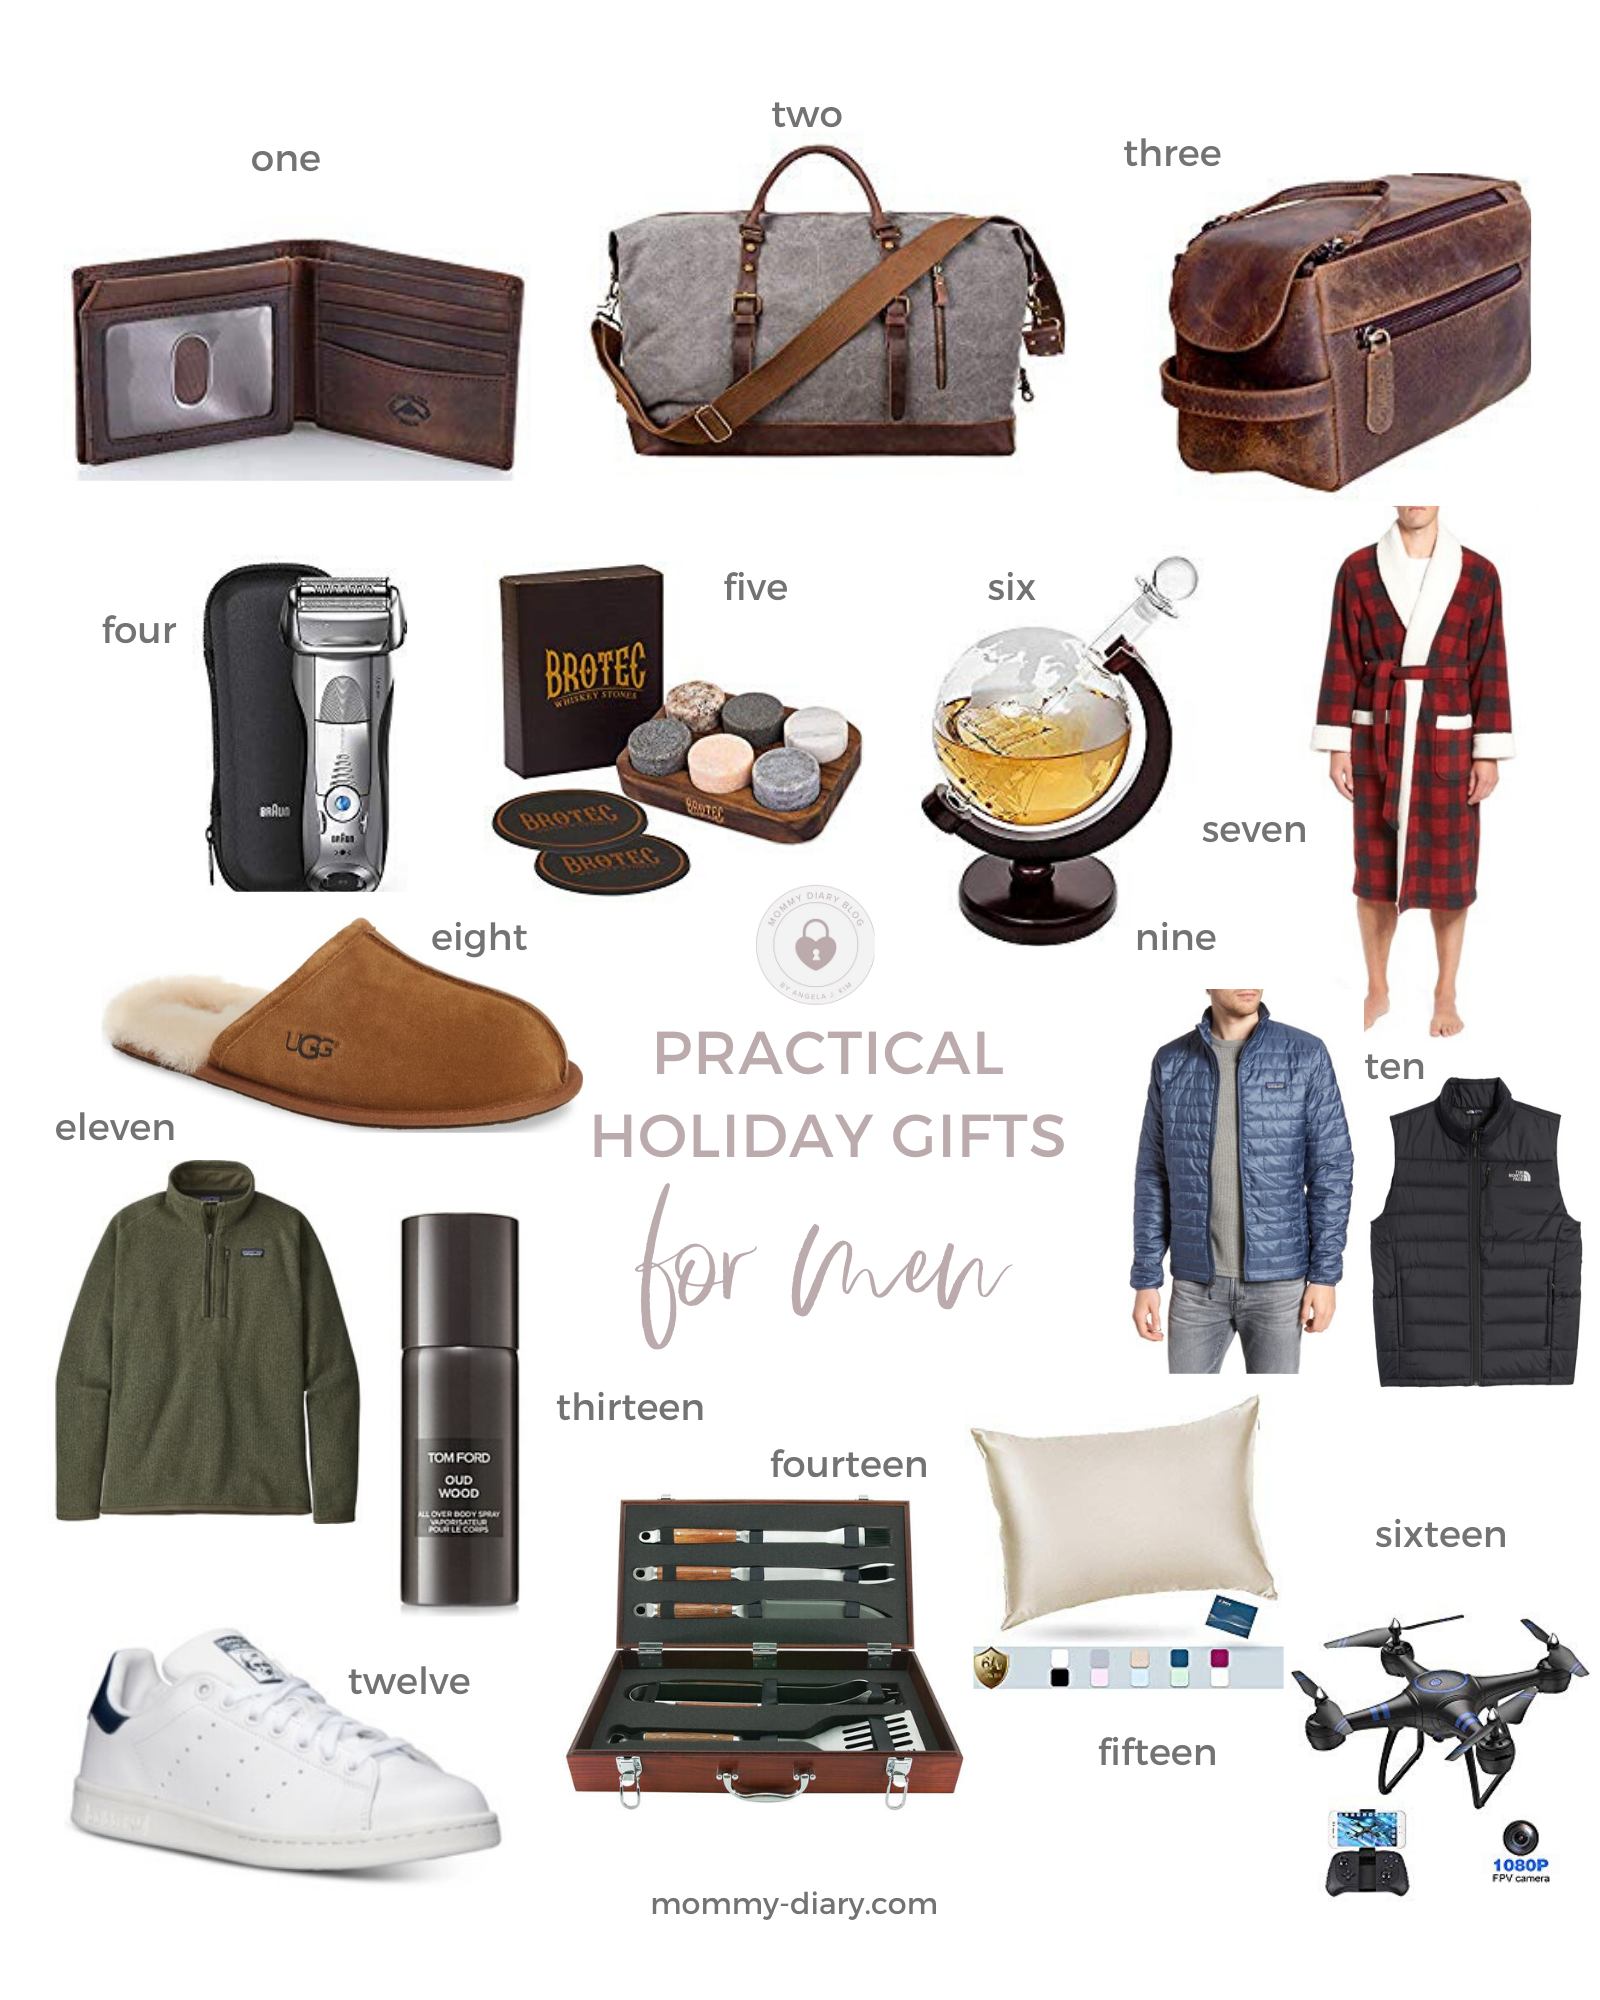 Practical Holiday Gifts for Men